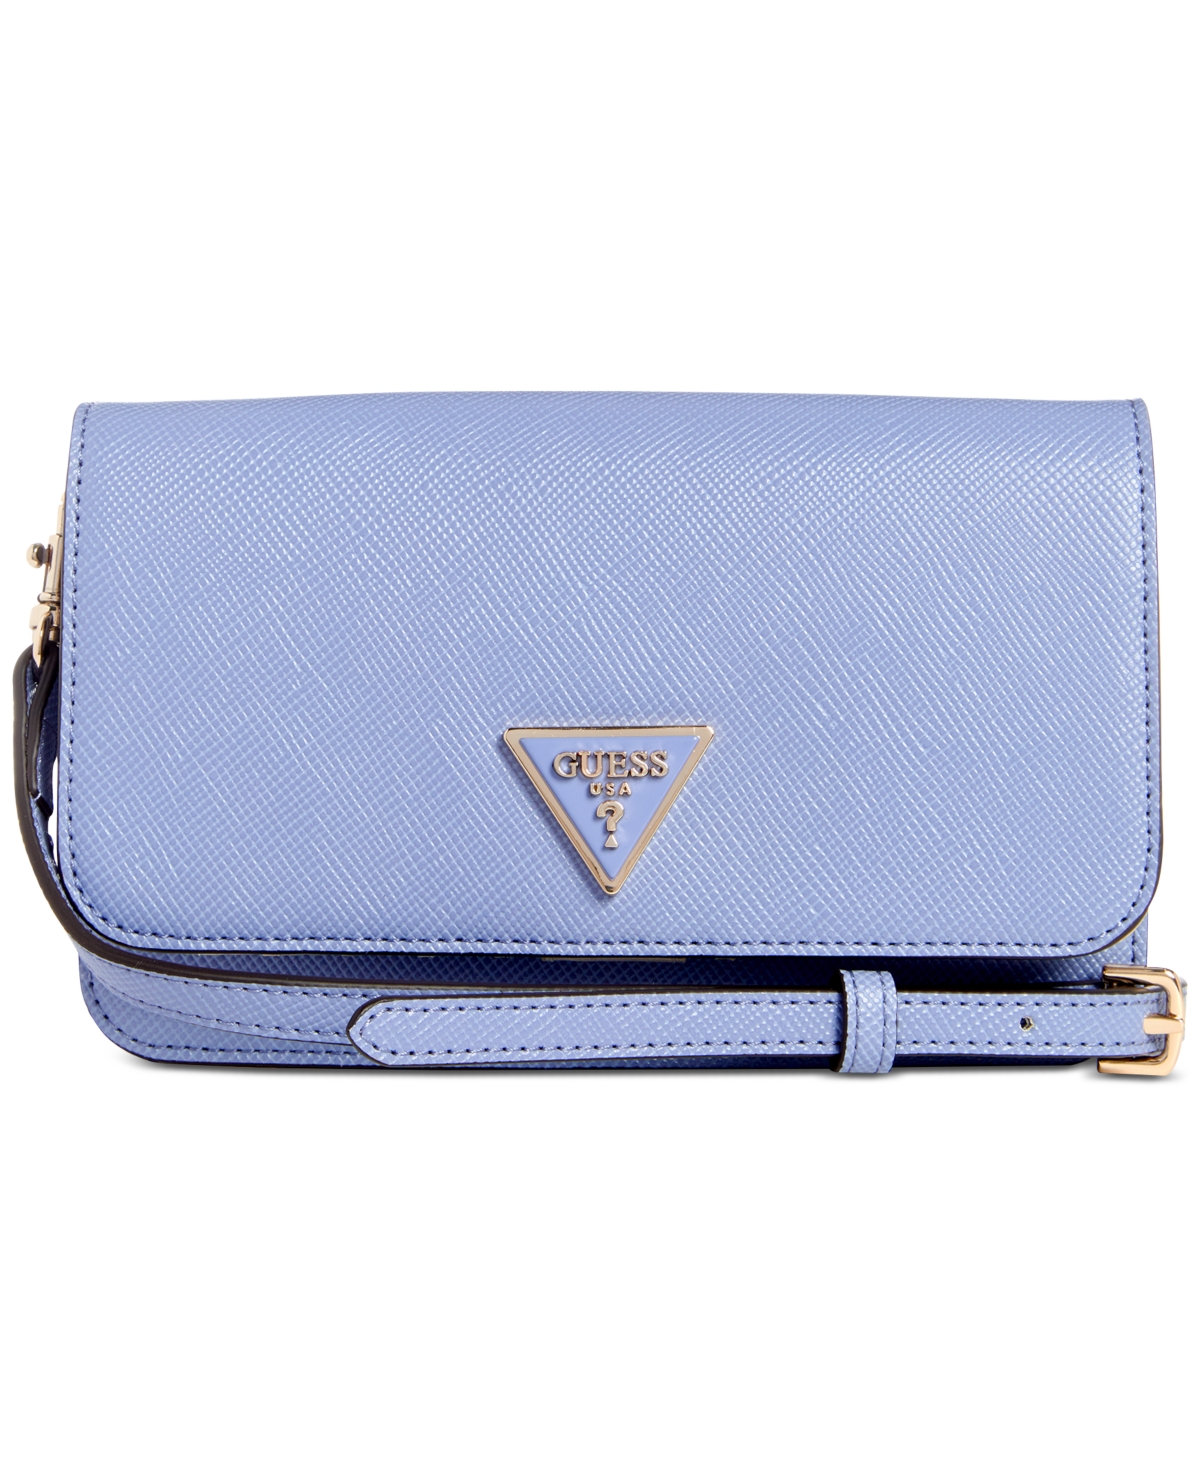 Guess Noelle Small Flap Organizer Crossbody In Wisteria | ModeSens